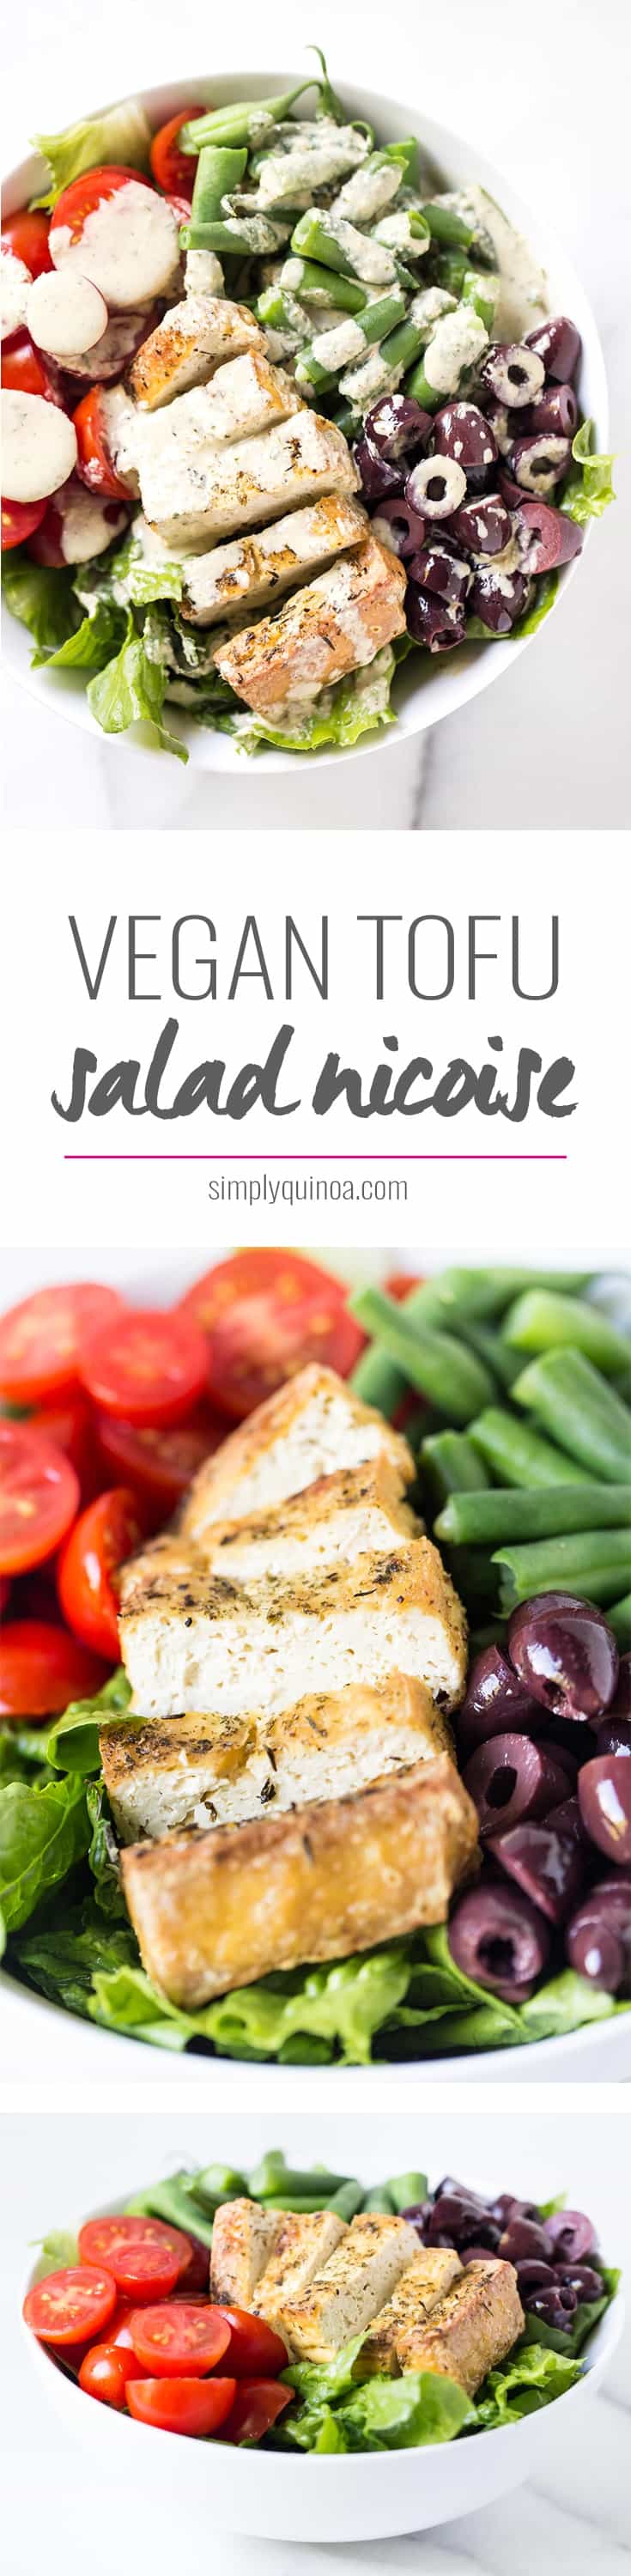 TOFU SALAD NICOISE >> a plant-based version of the classic French recipe with a healthy twist!